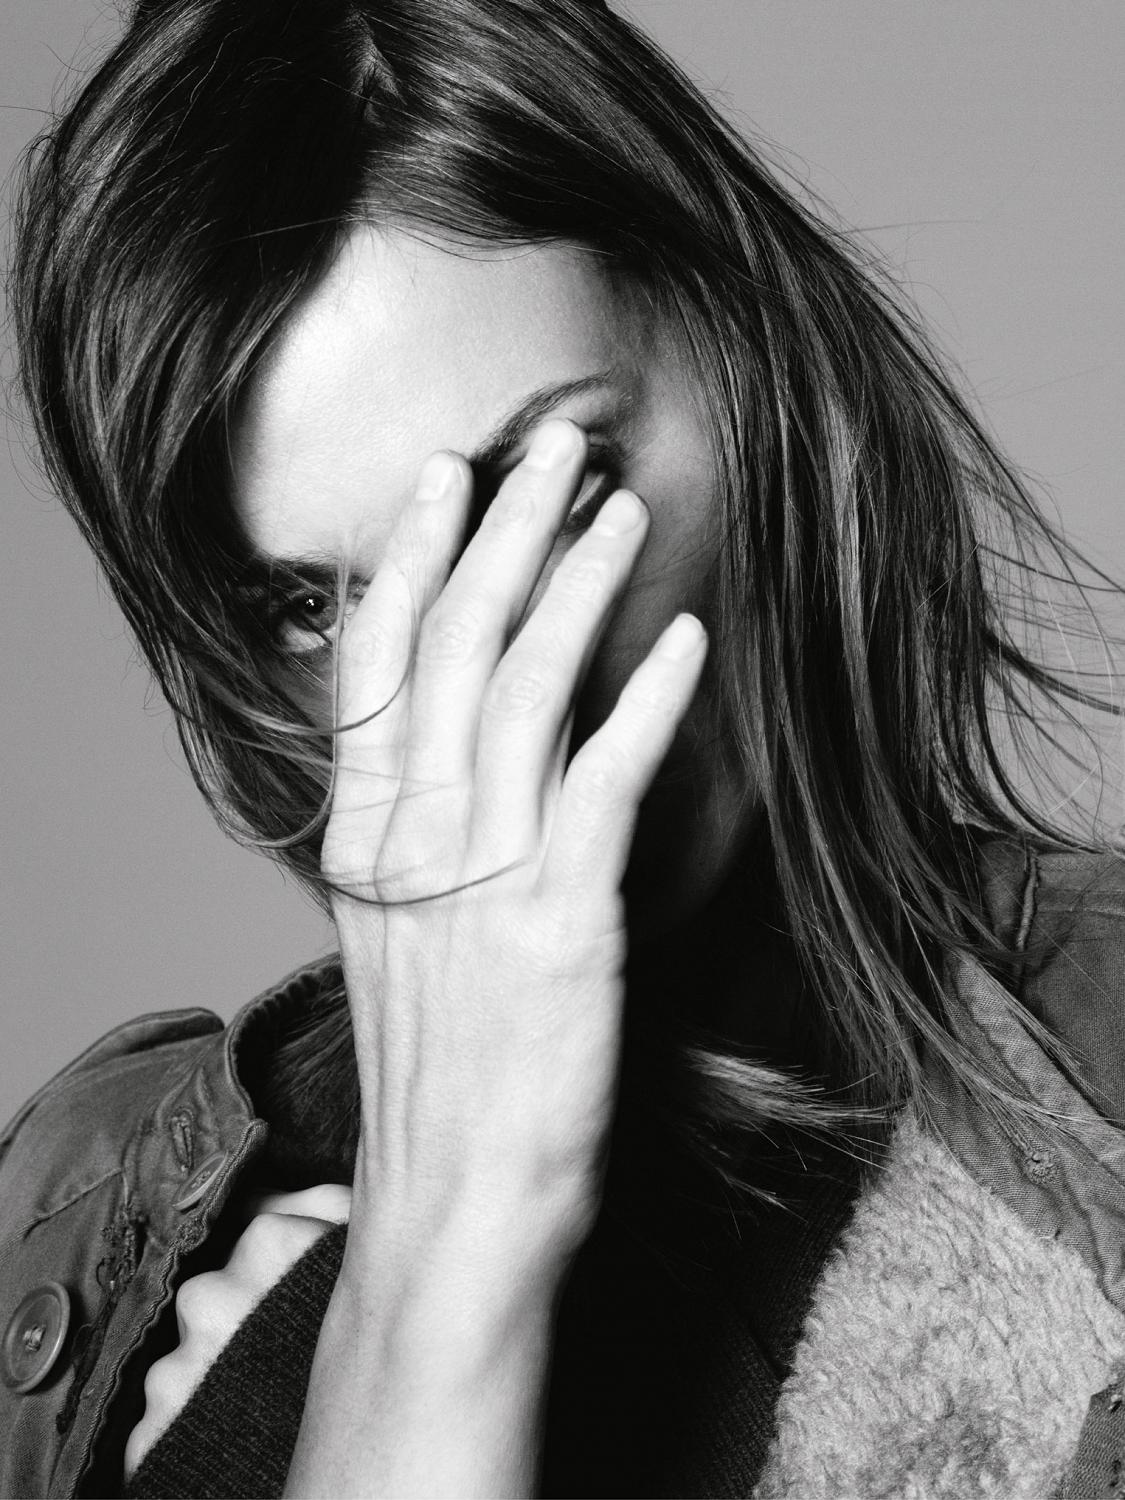 Phoebe Philo, Biography, Celine, Brand, Designs, Collection,& Facts